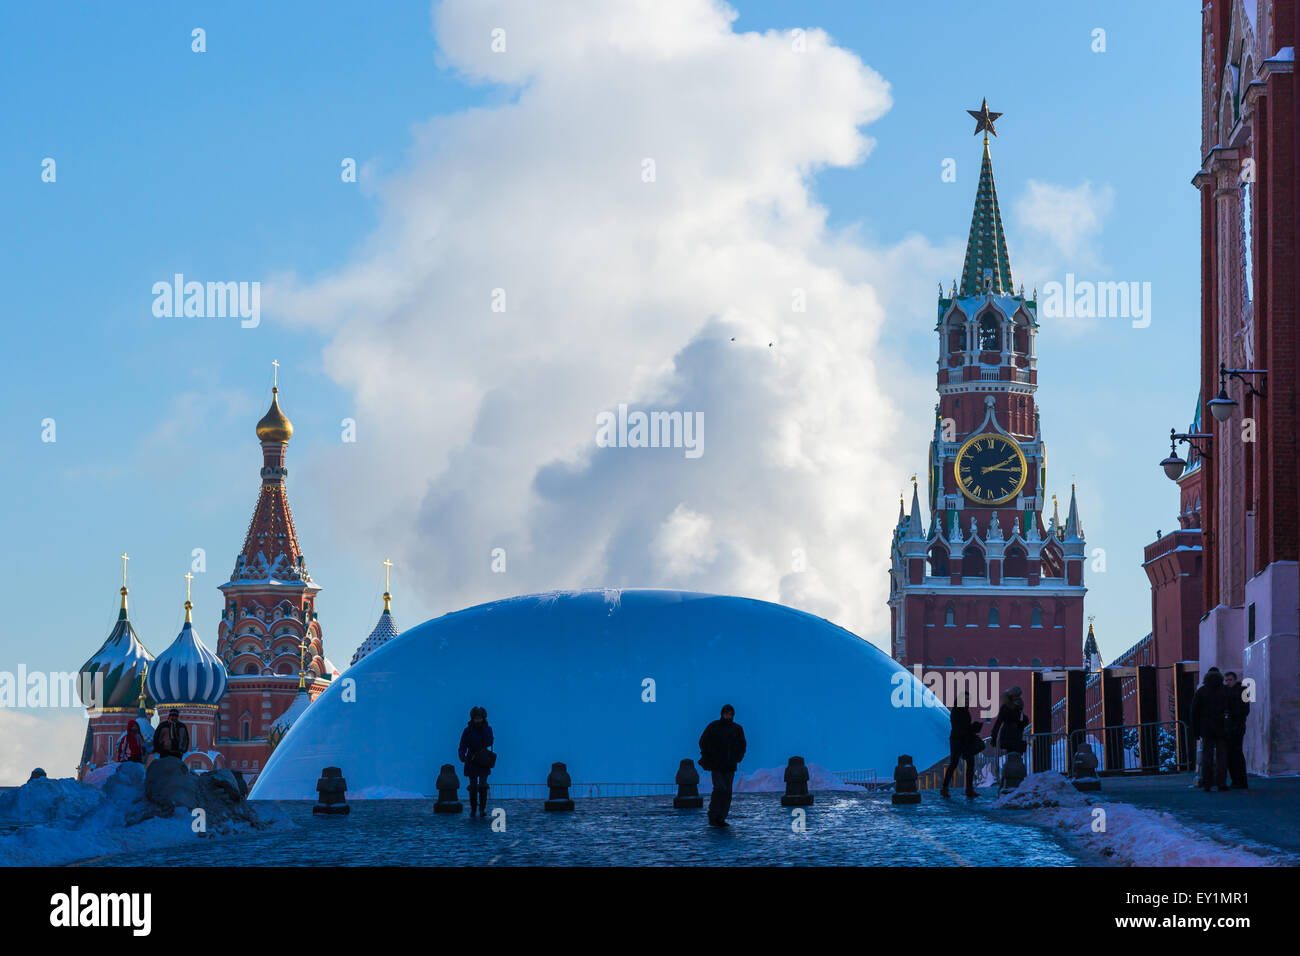 St. Basil's cathedral, Spassky tower of the Kremlin and protective cover over Lenin's mausoleum Stock Photo